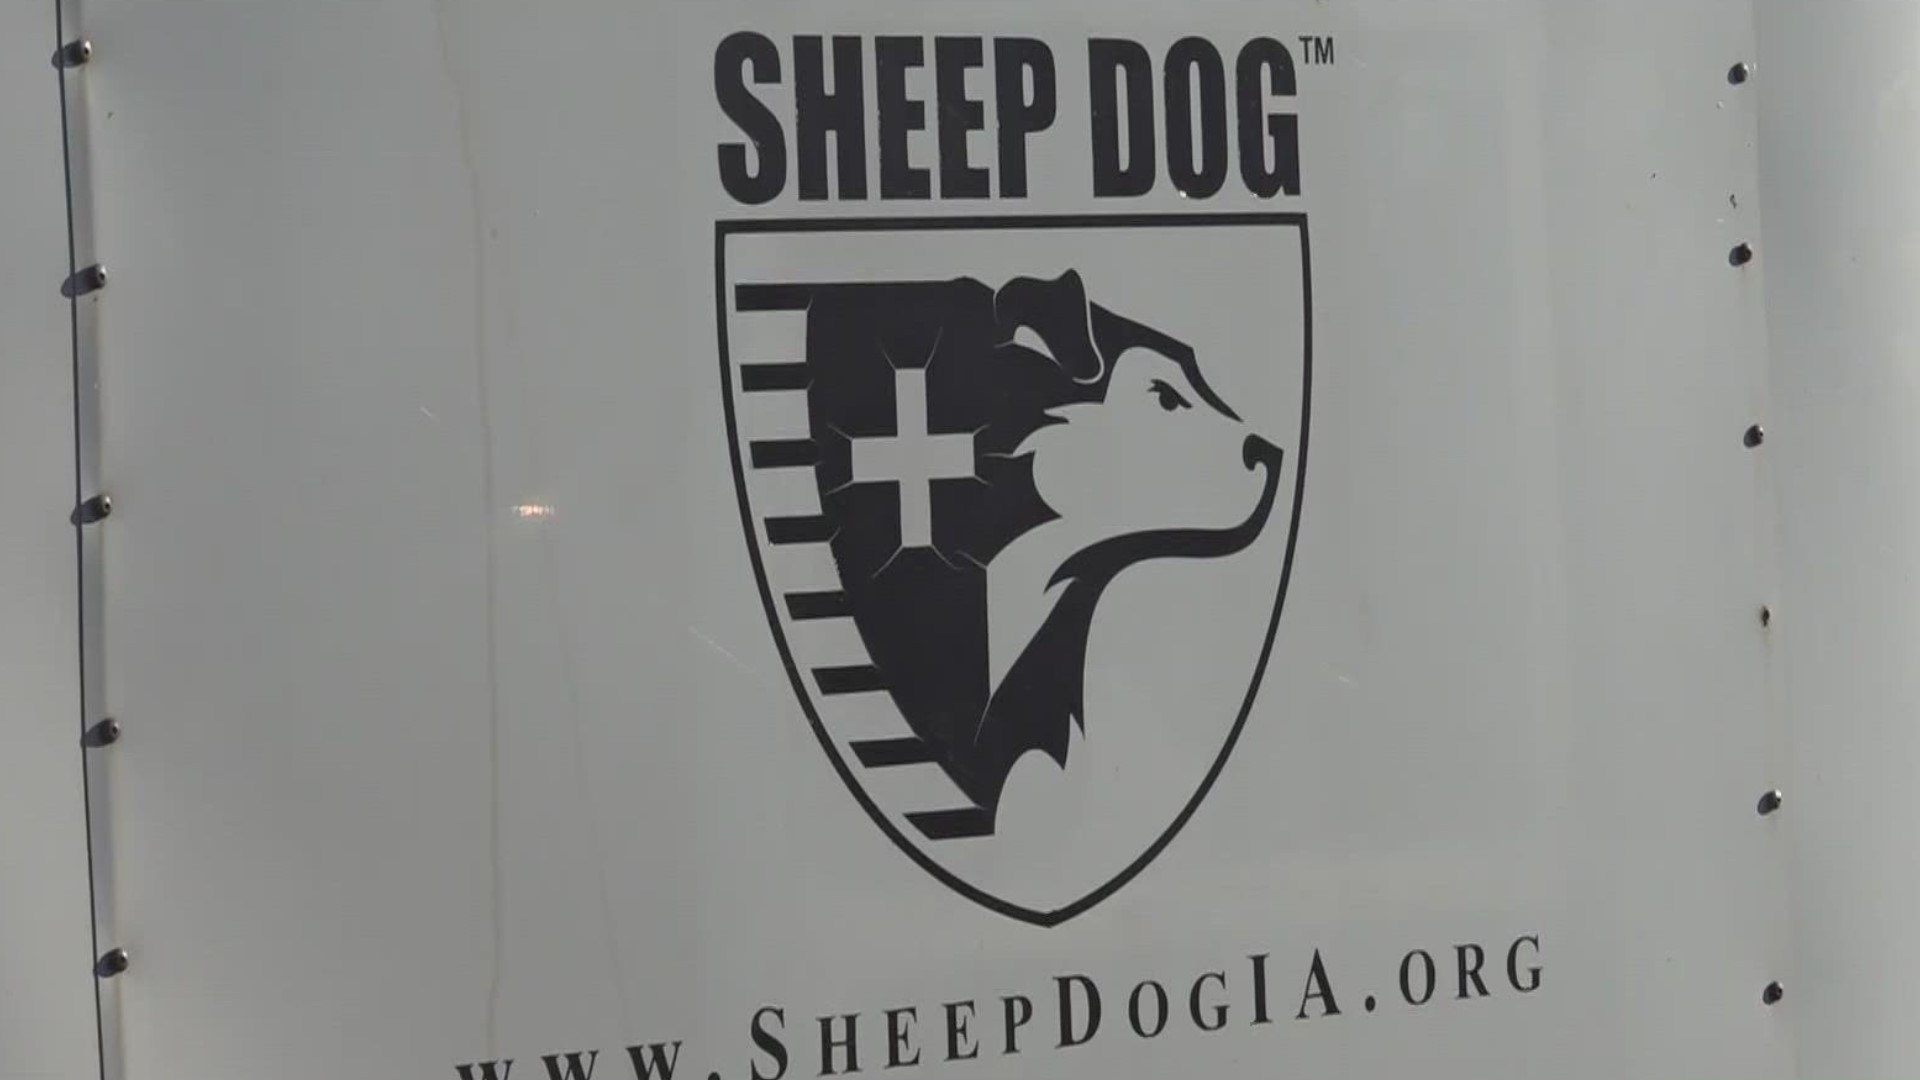 Sheep Dog Impact Assistance departed on Sunday from Rogers to provide relief in the Fort Meyers area.